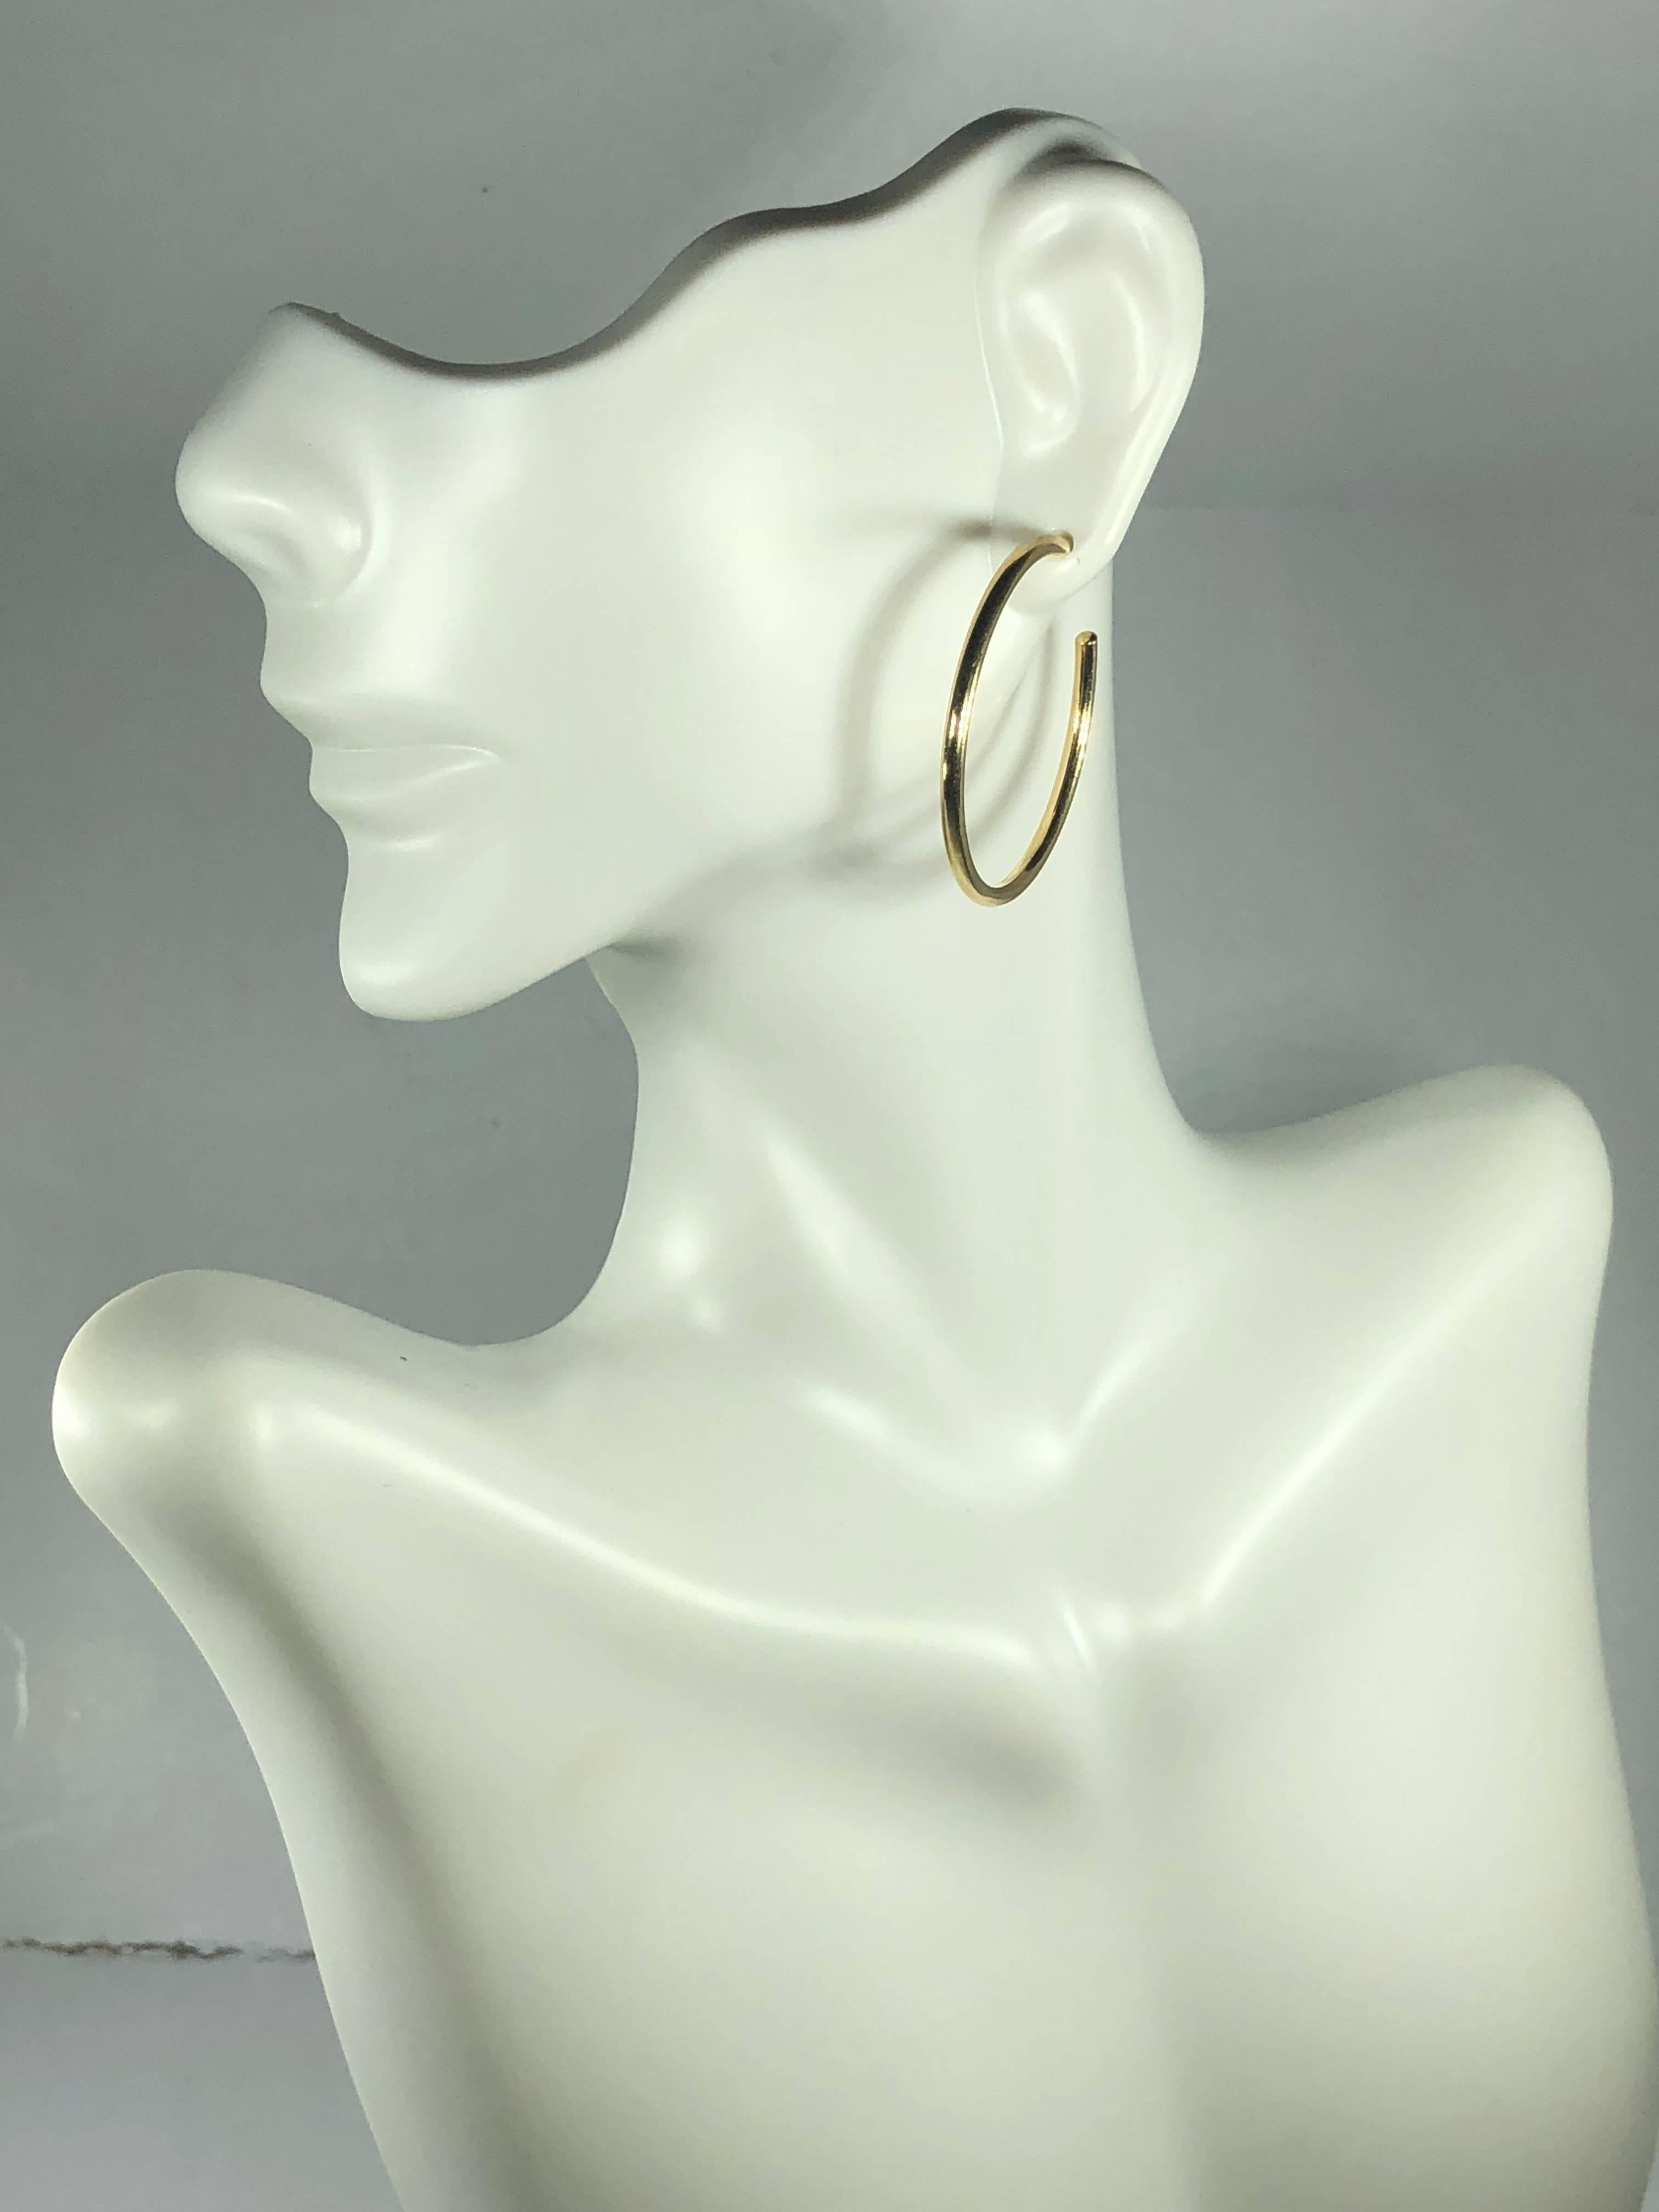 Tiffany &Co 18 karat yellow gold classic hoop earrings. Signed Tiffany & Co classic hoop earrings created in 18 karat yellow gold. These earrings weigh 4.3 grams collectively. Original T& Co backings also in 750 18 karat yellow gold. Each individual